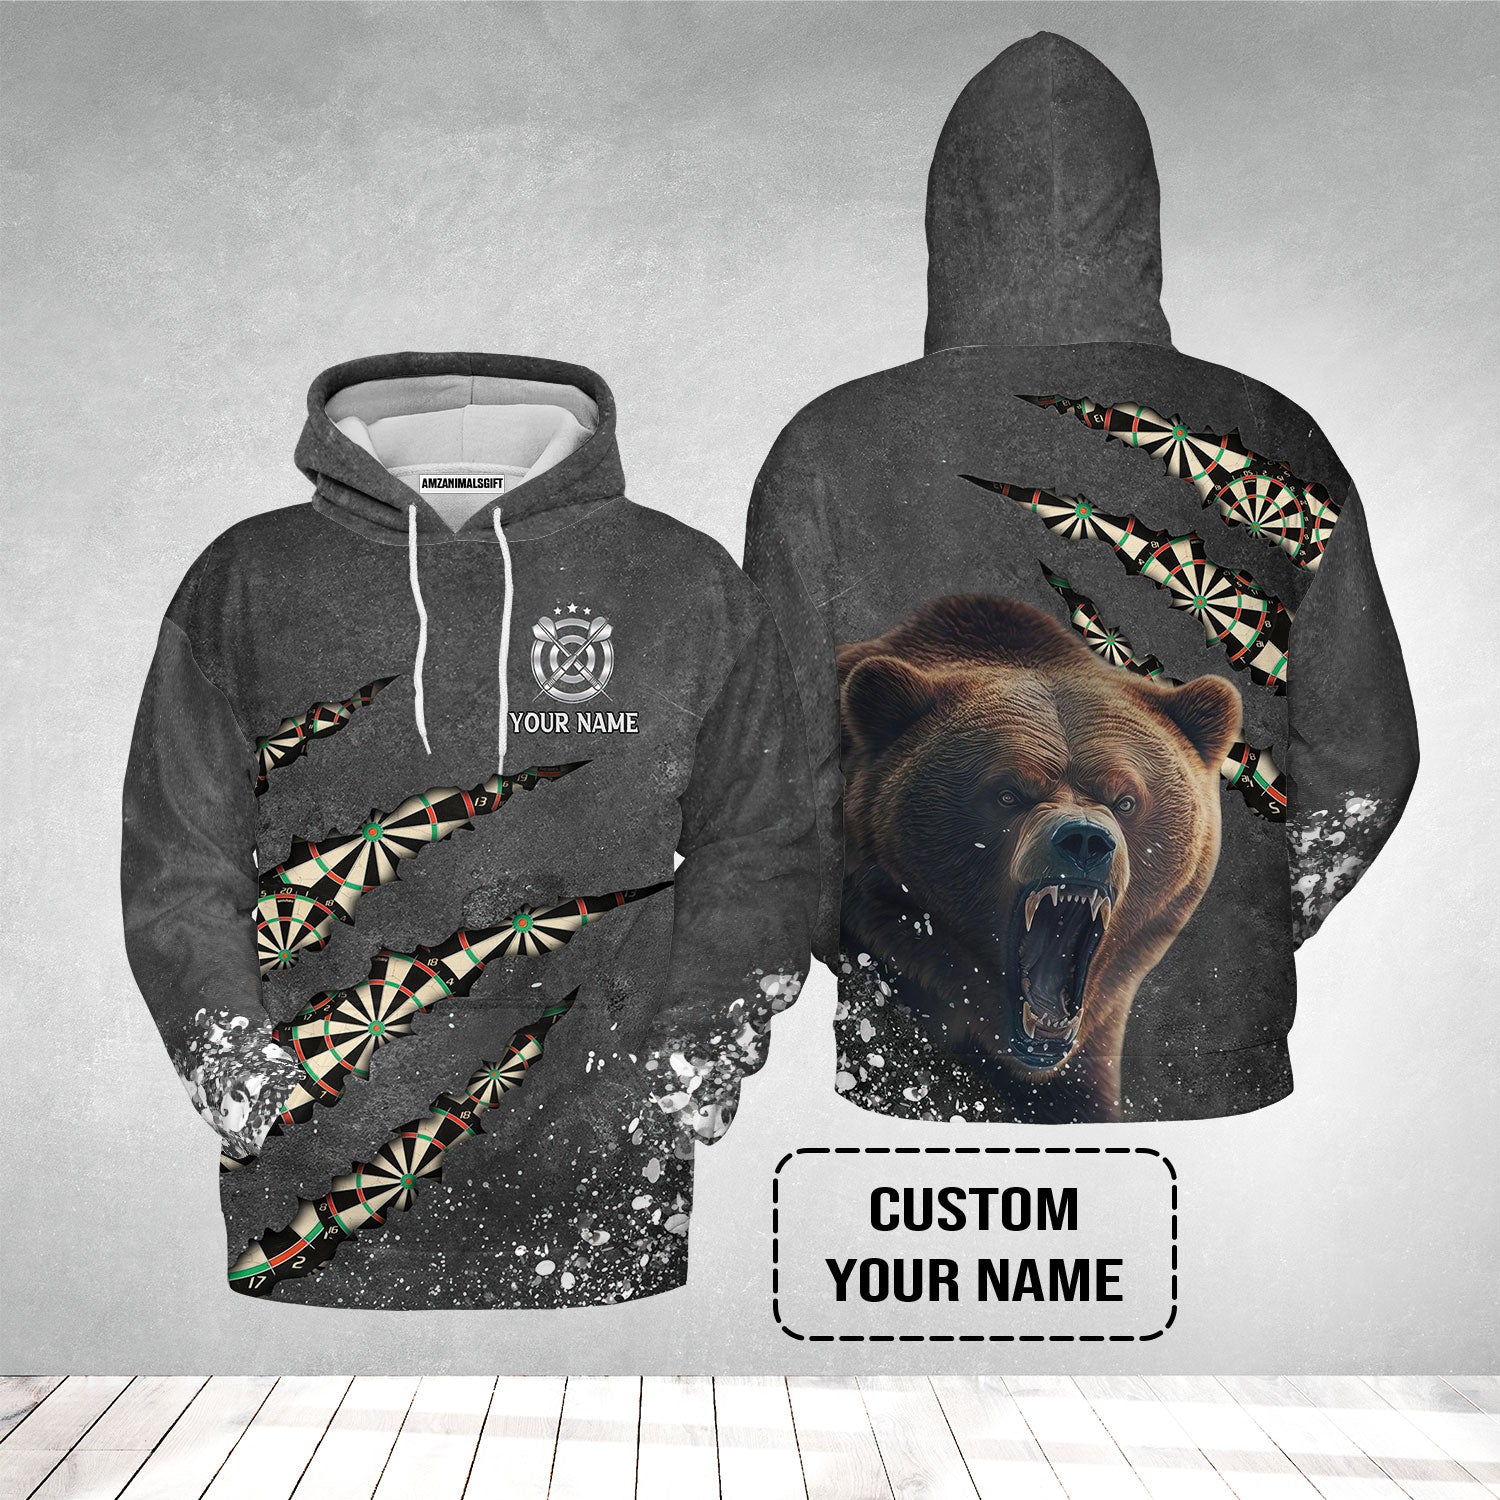 Darts Customized Name Hoodie, Darts Paints Splash, Personalized Name Bear Hoodie - Perfect Gift For Darts Lovers, Darts Players